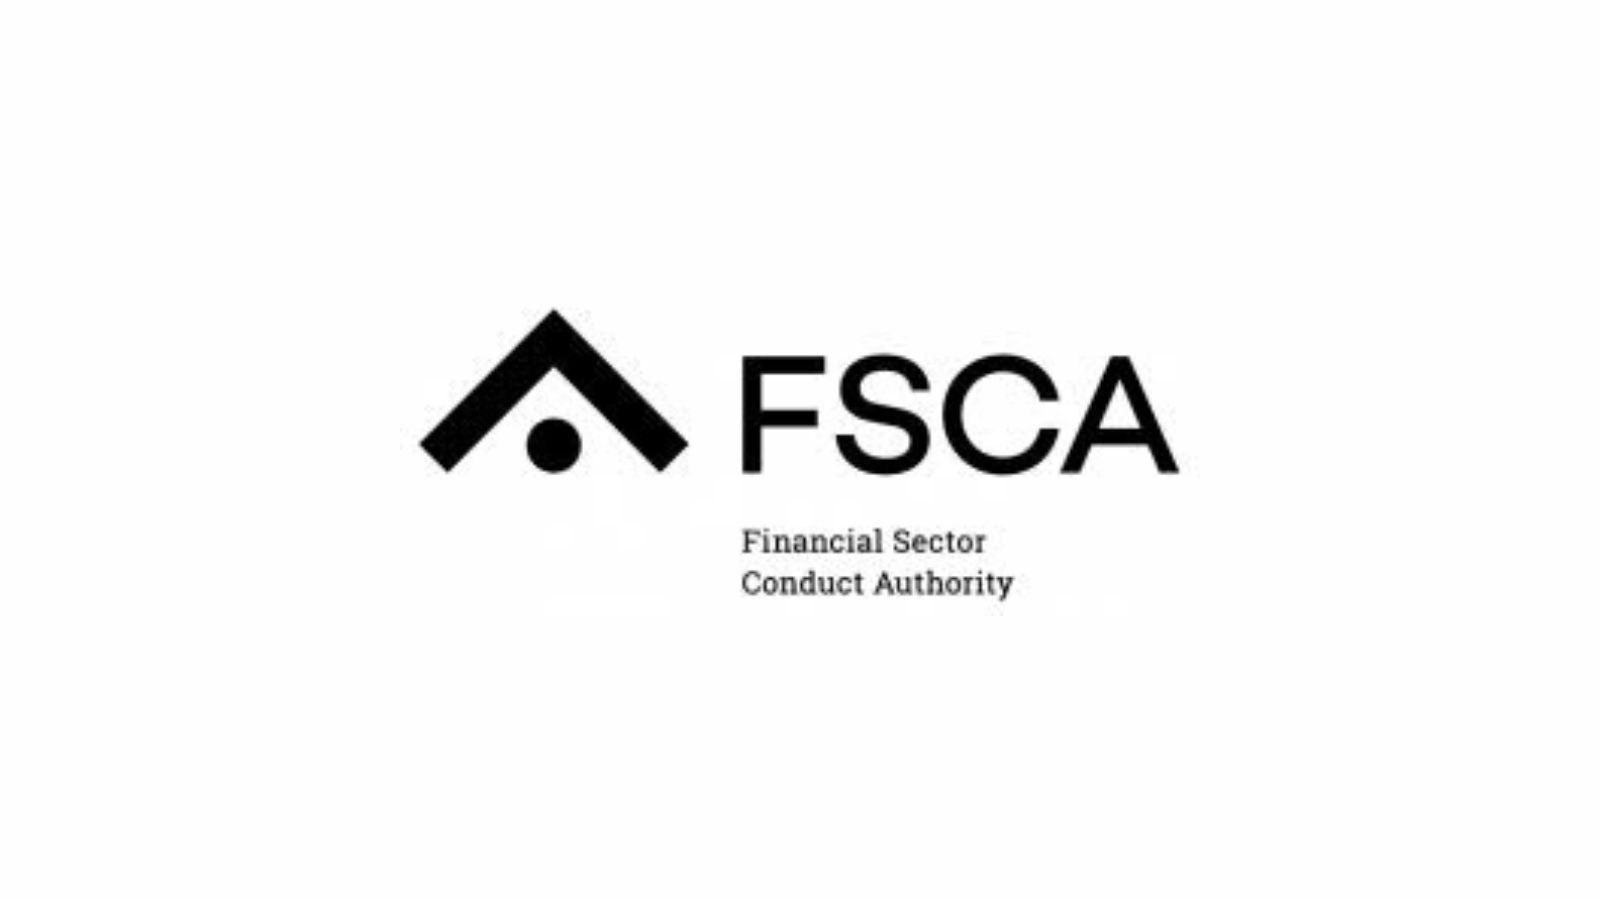 Financial Sector Conduct Authority (FSCA)